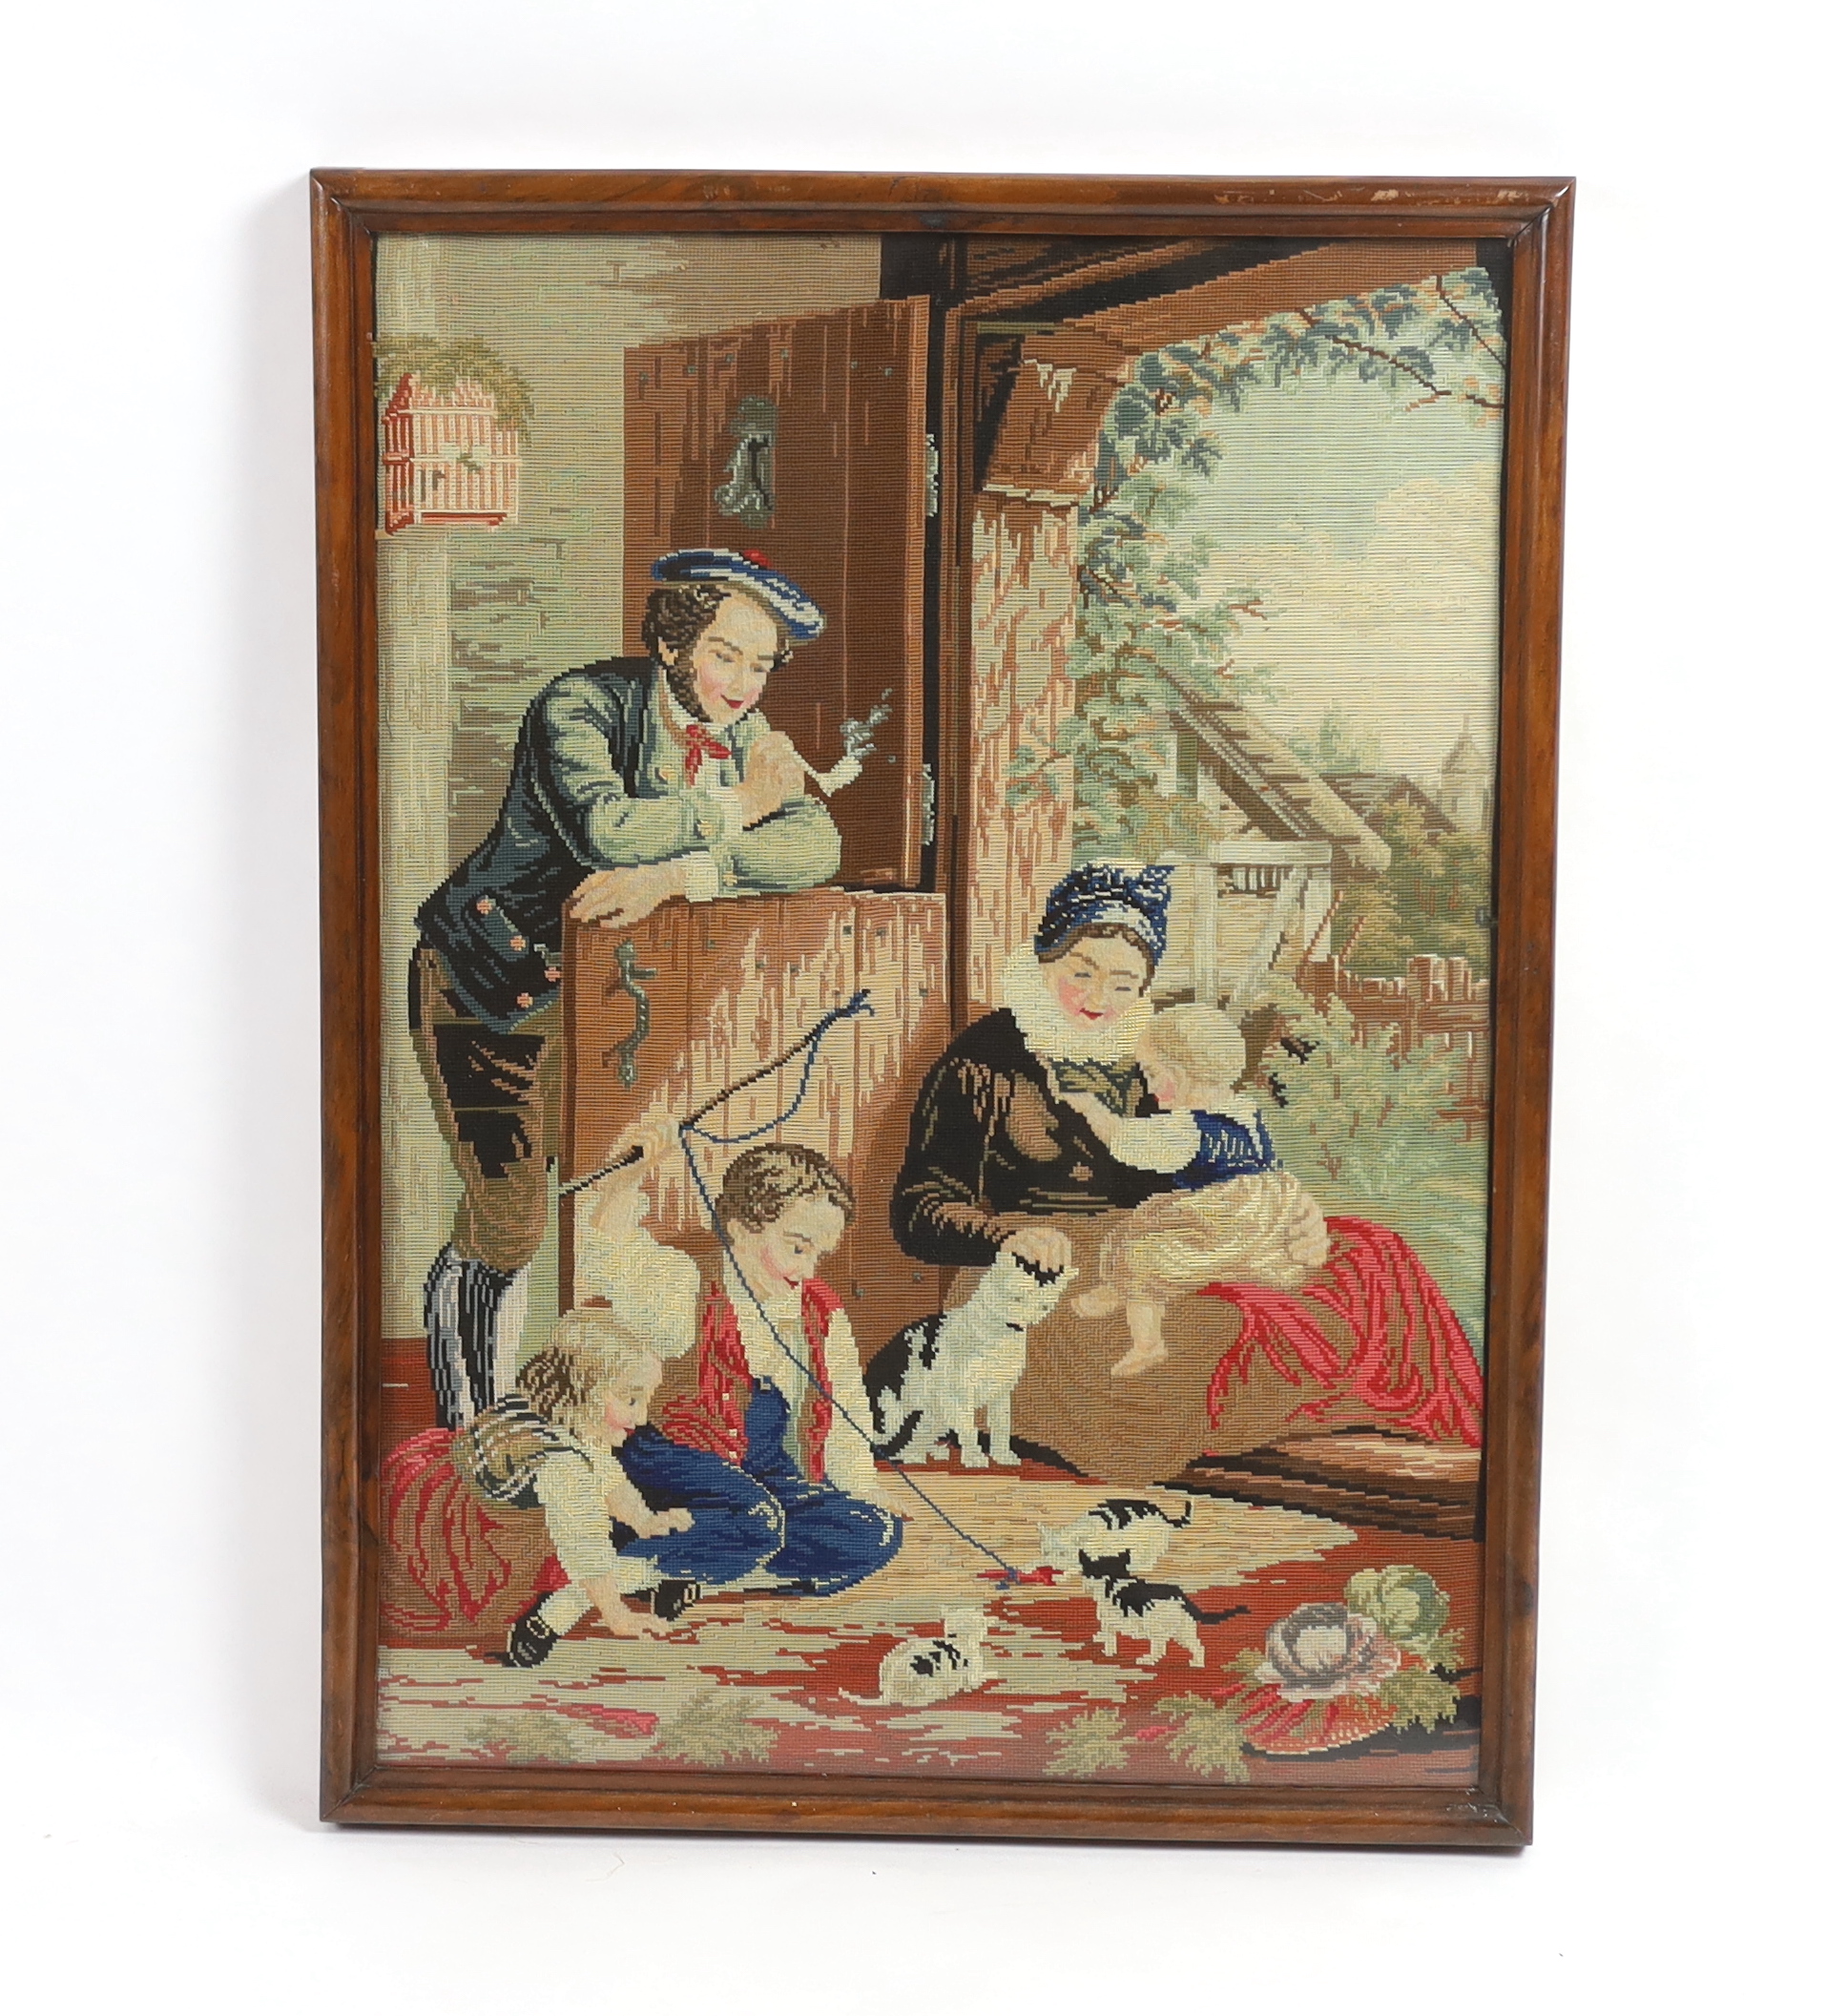 A framed 19th century Berlin woodwork embroidery of a Scottish farmhouse scene, embroidered with children and kittens playing, a mother, baby and father smoking a clay pipe, wearing a Tam o'Shanter leaning on a door, 53c